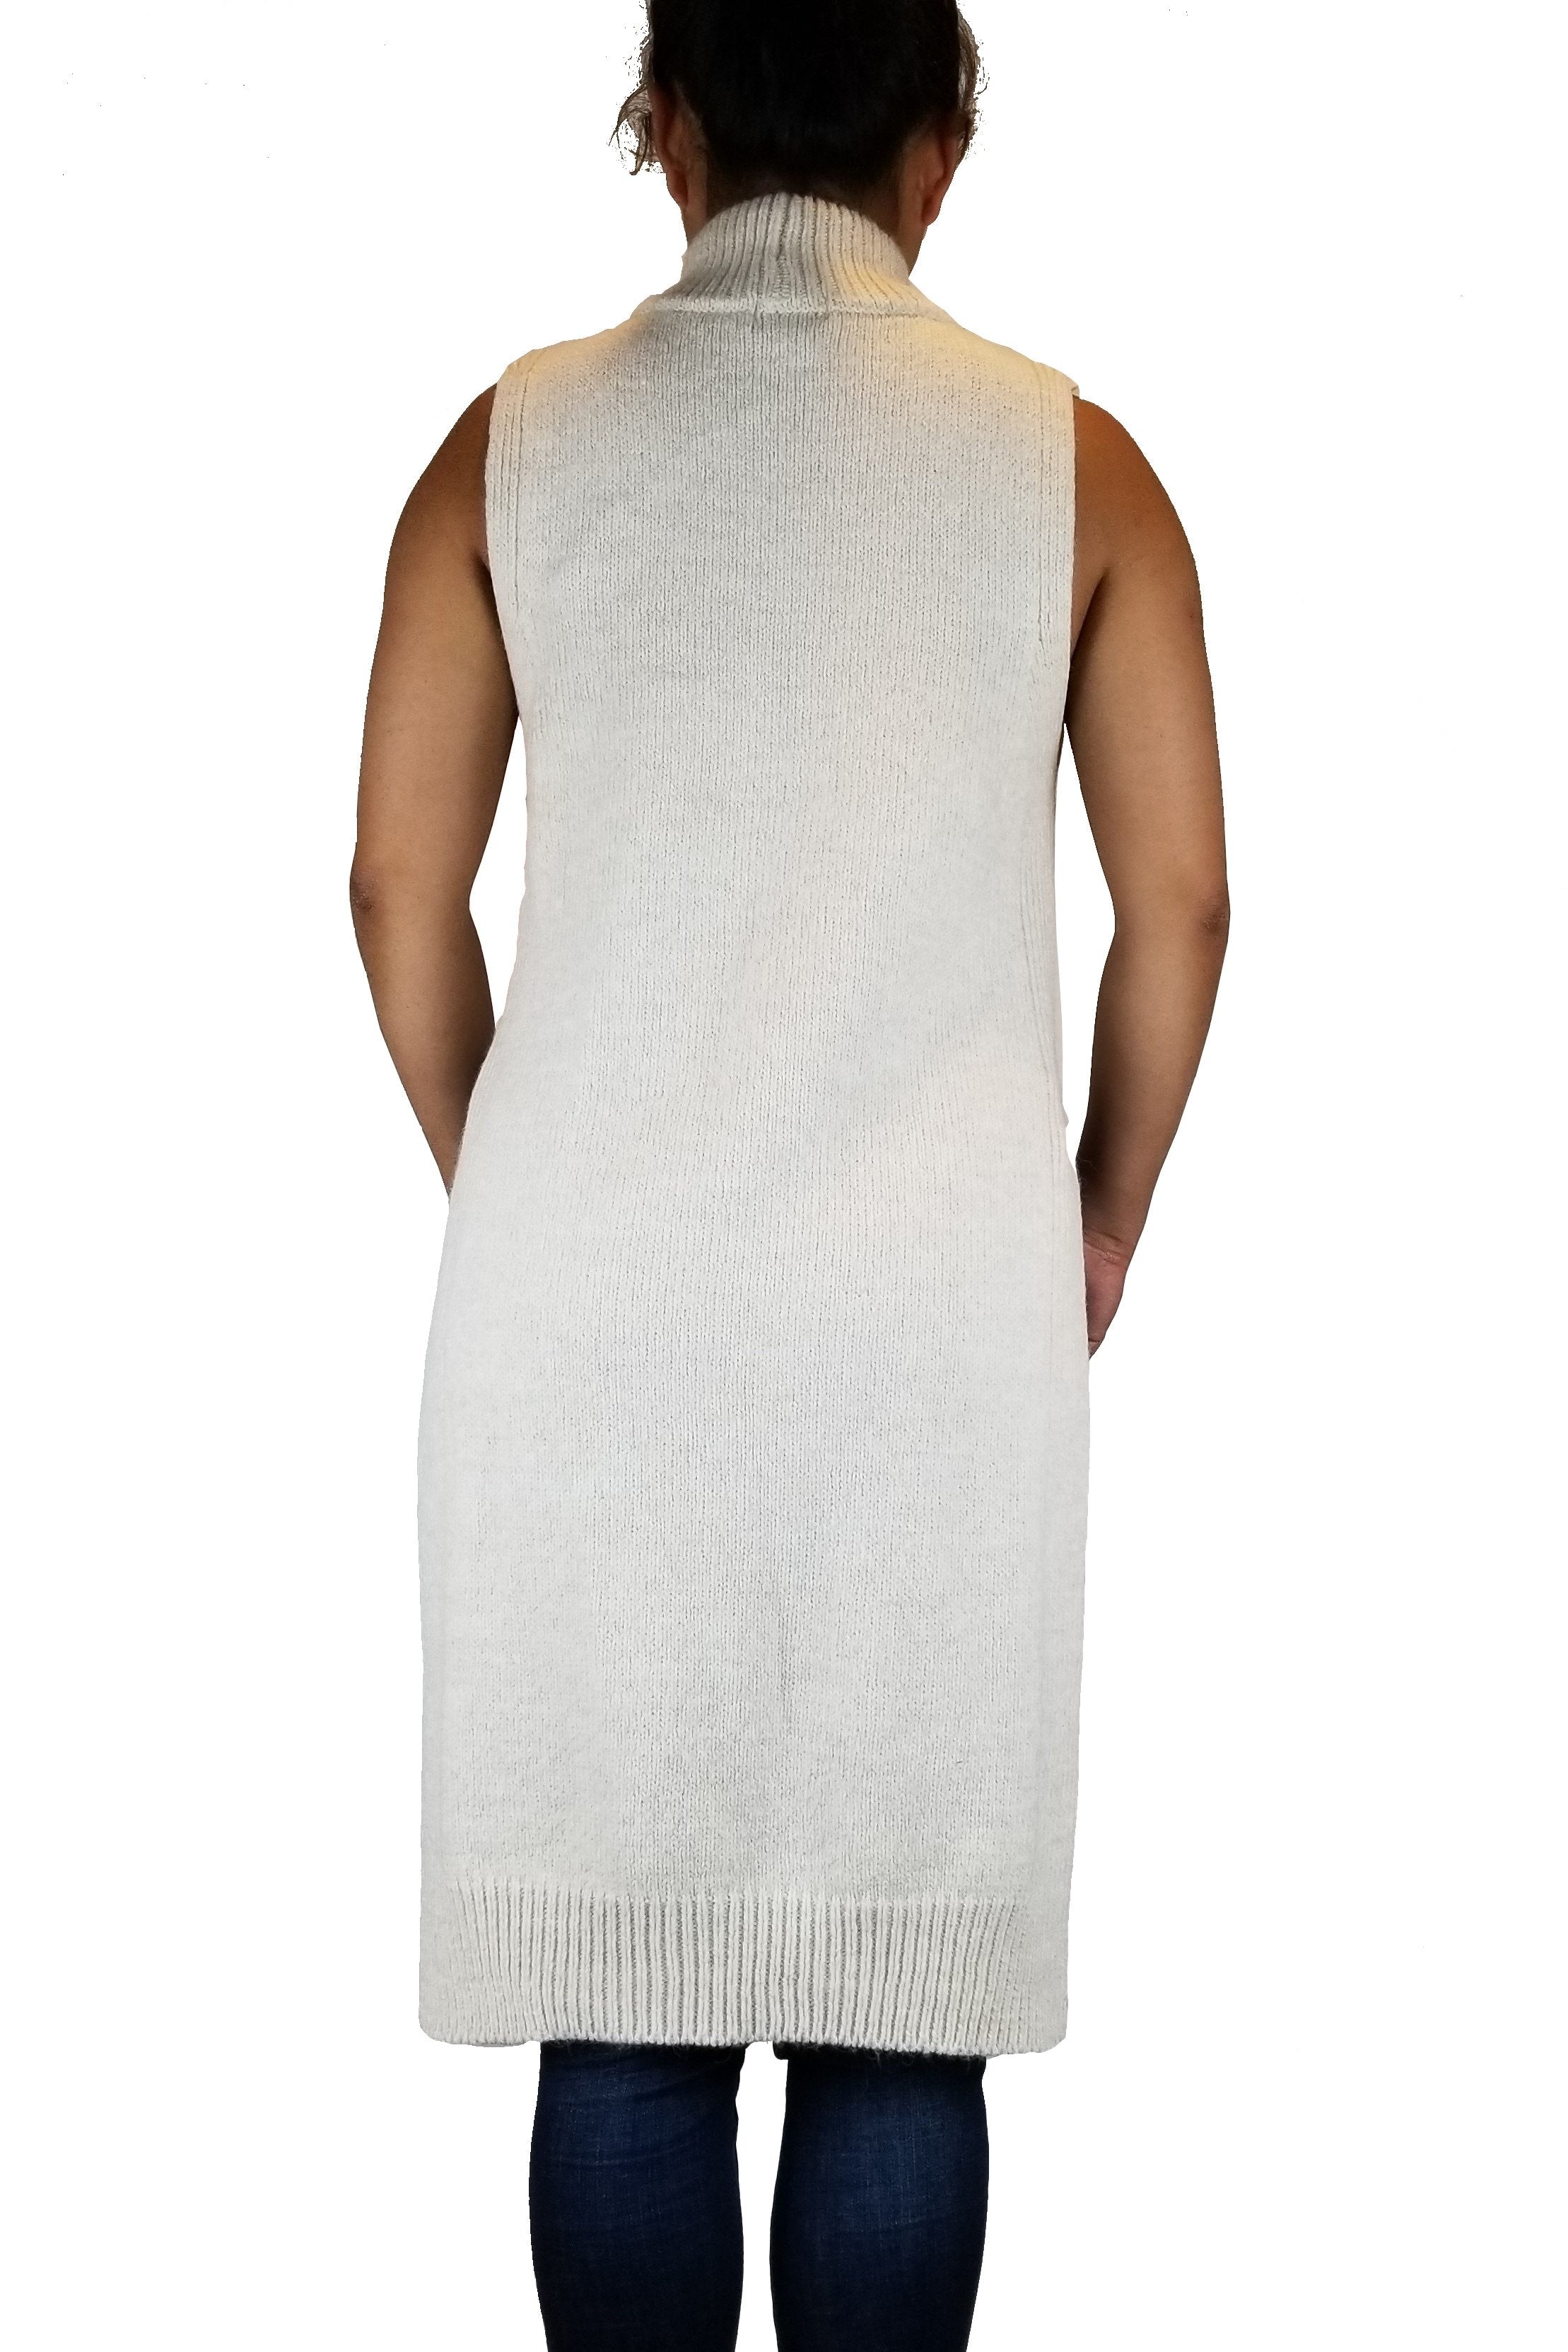 Topshop Sleeveless Sweater dress, I never understood sleeveless sweater dresses until the regular sweater sleeves failed to slip into a skinny fall jacket. Enough said., White, 90%Arcrylic, 7% Polyamide, 3% Polyester, women's long white sweater, women's comfy turtle neck sleeveless sweater